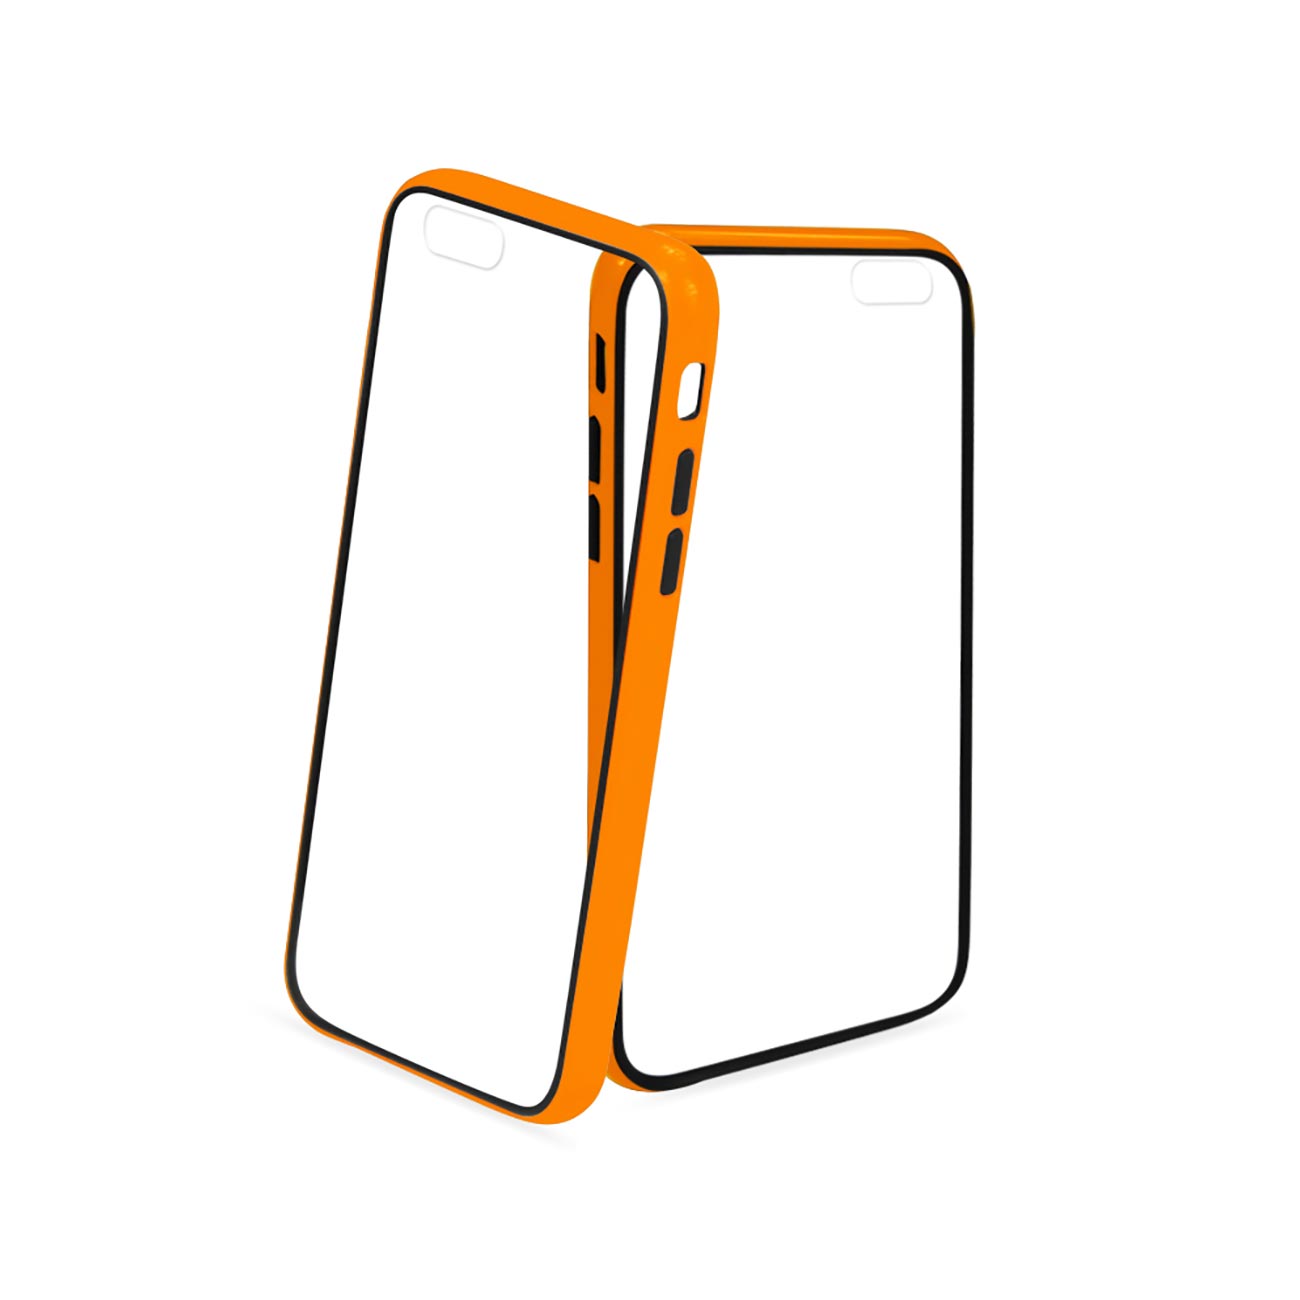 iPhone 6 Bumper Case With Tempered Glass Screen Protector In Orange